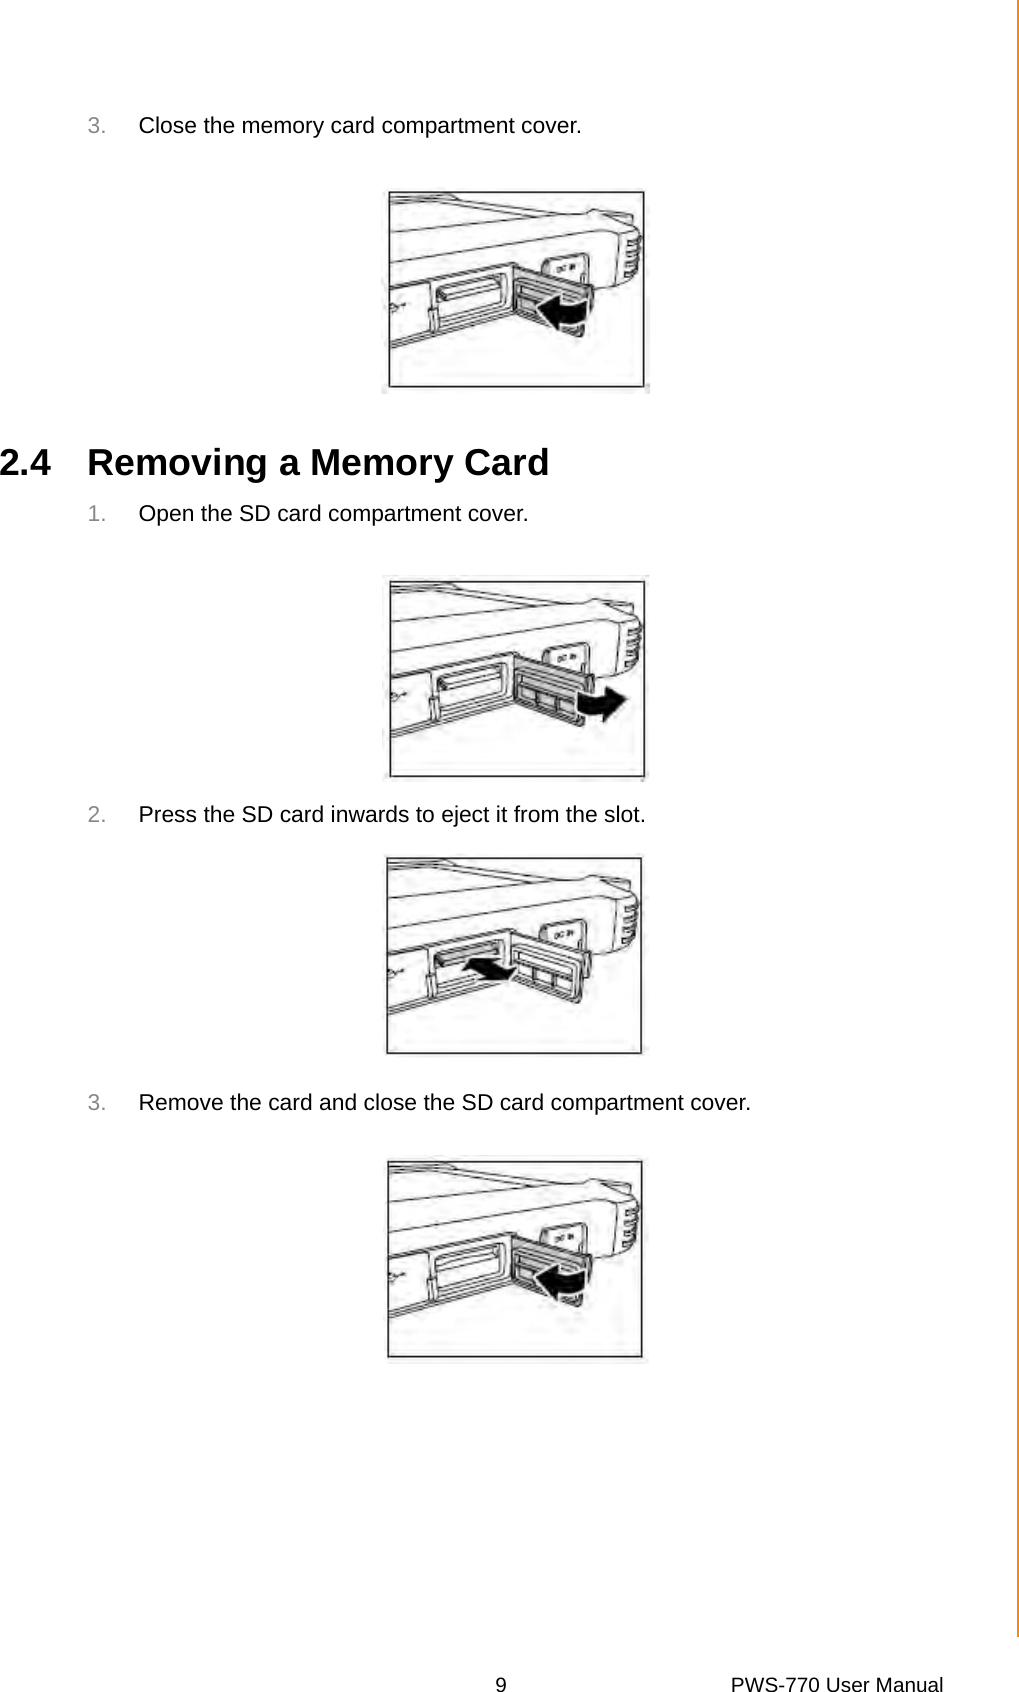 9 PWS-770 User ManualChapter 2 Getting Started3. Close the memory card compartment cover.2.4 Removing a Memory Card1. Open the SD card compartment cover.2. Press the SD card inwards to eject it from the slot.3. Remove the card and close the SD card compartment cover.